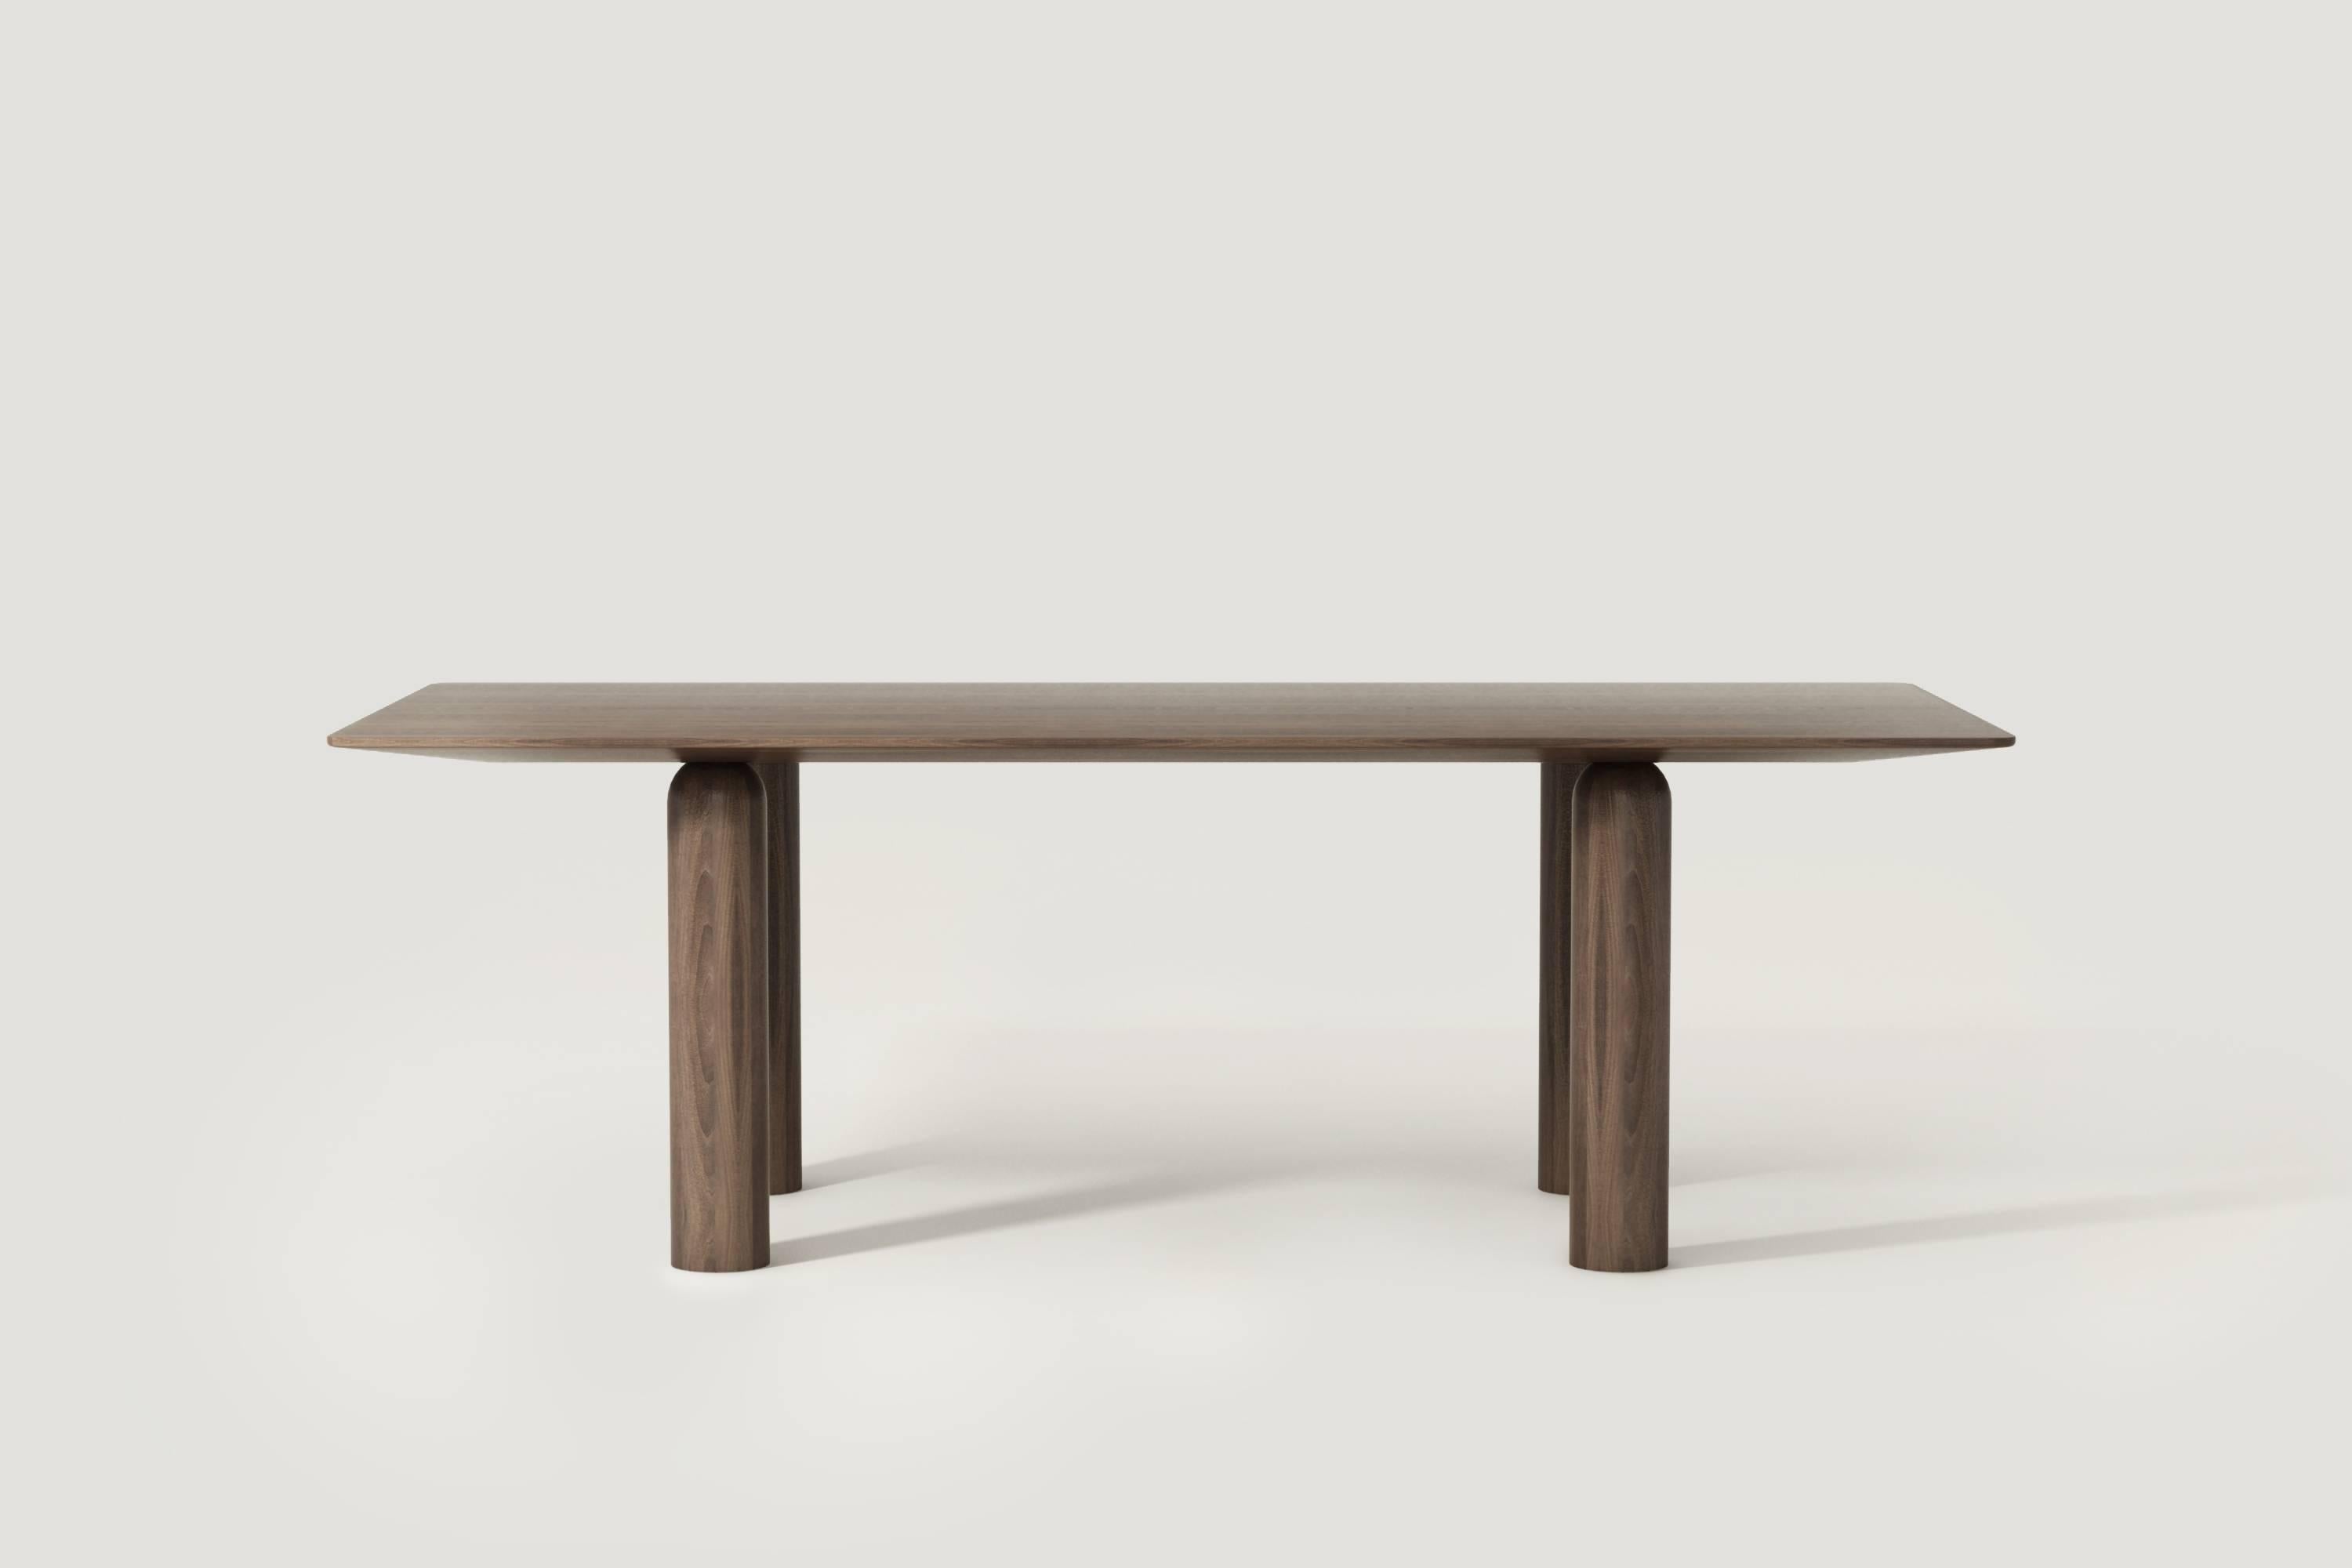 Colonne table connects different elements in a very invisible way to create an object.

Materials: 
Tabletop in solid walnut wood
Table feet in solid walnut wood.